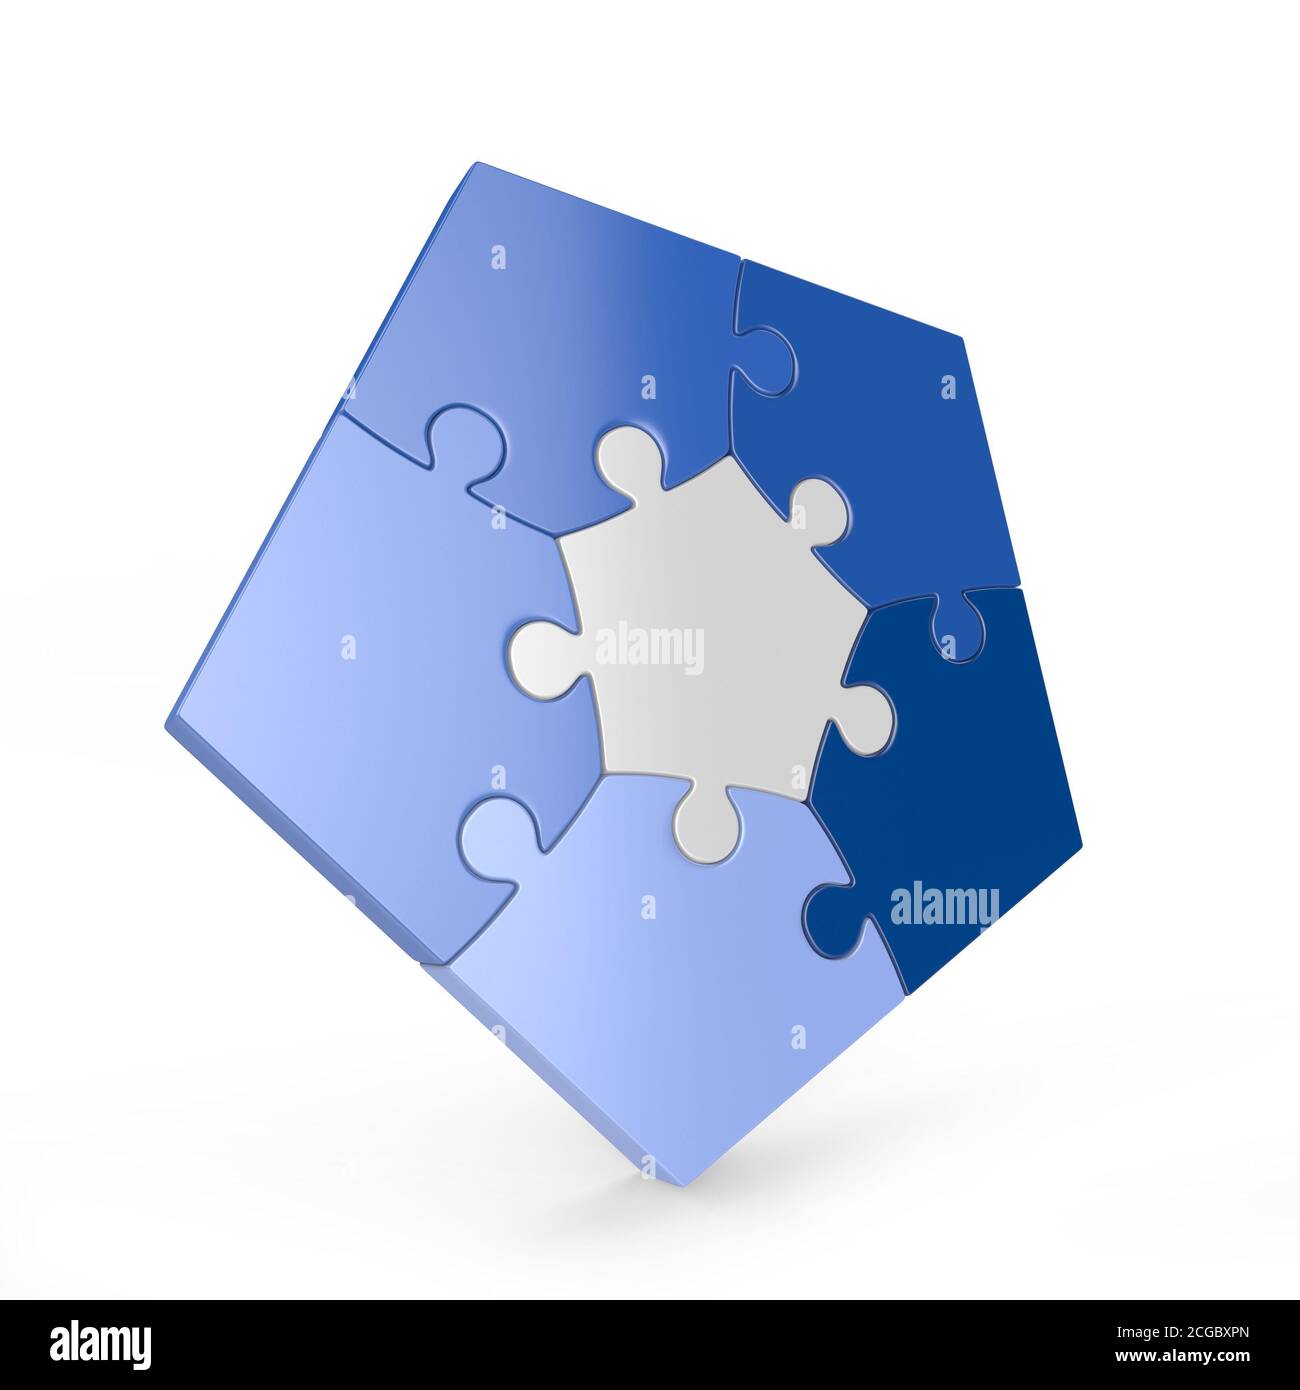 Five sided puzzles 3d rendering Stock Photo